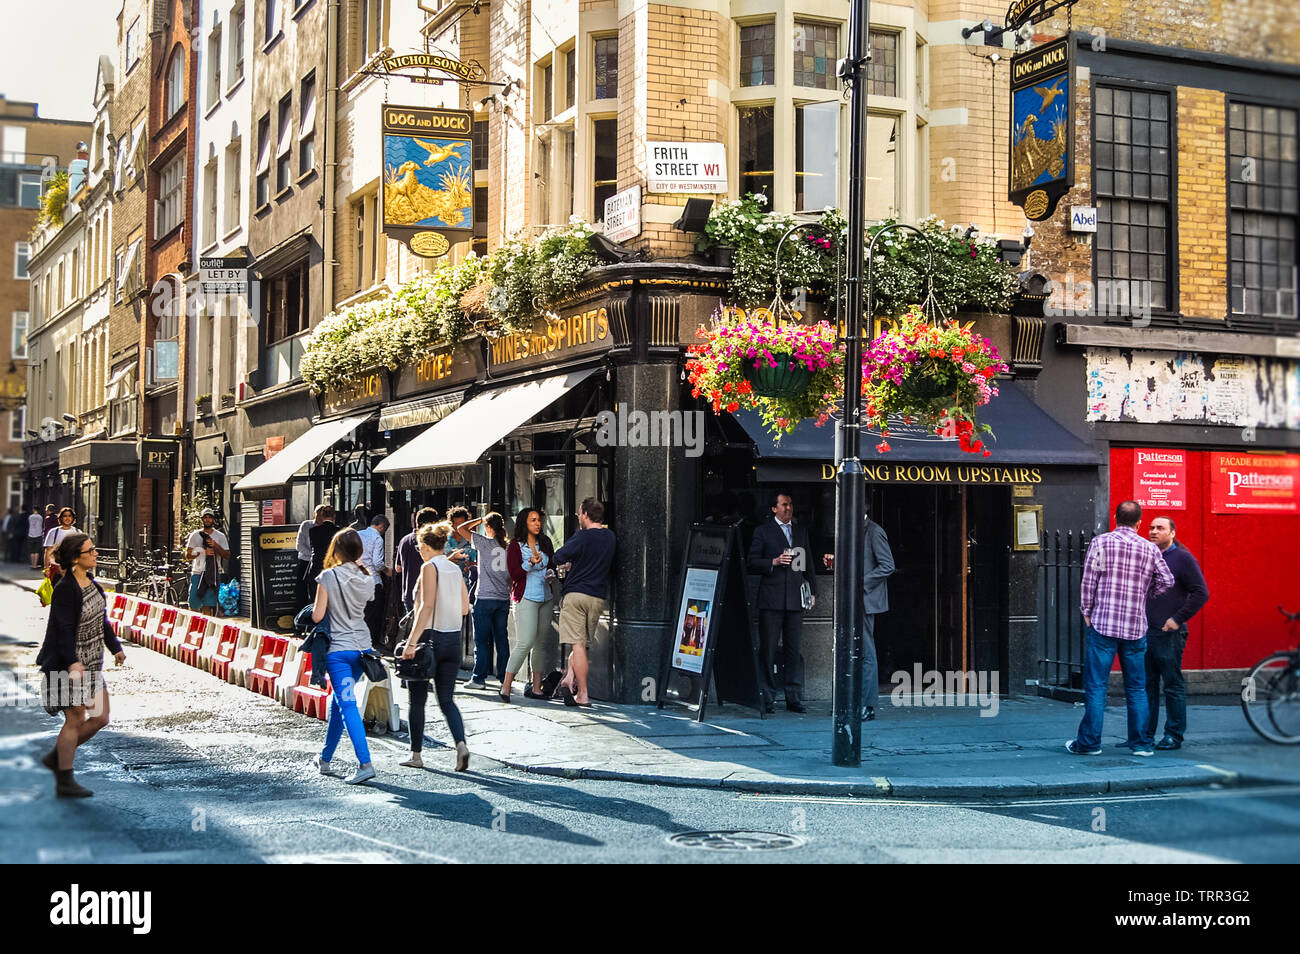 'The Dog and Duck', London, UK. Traditional London pub in Soho with one of the most famous and exquisite interiors. Stock Photo